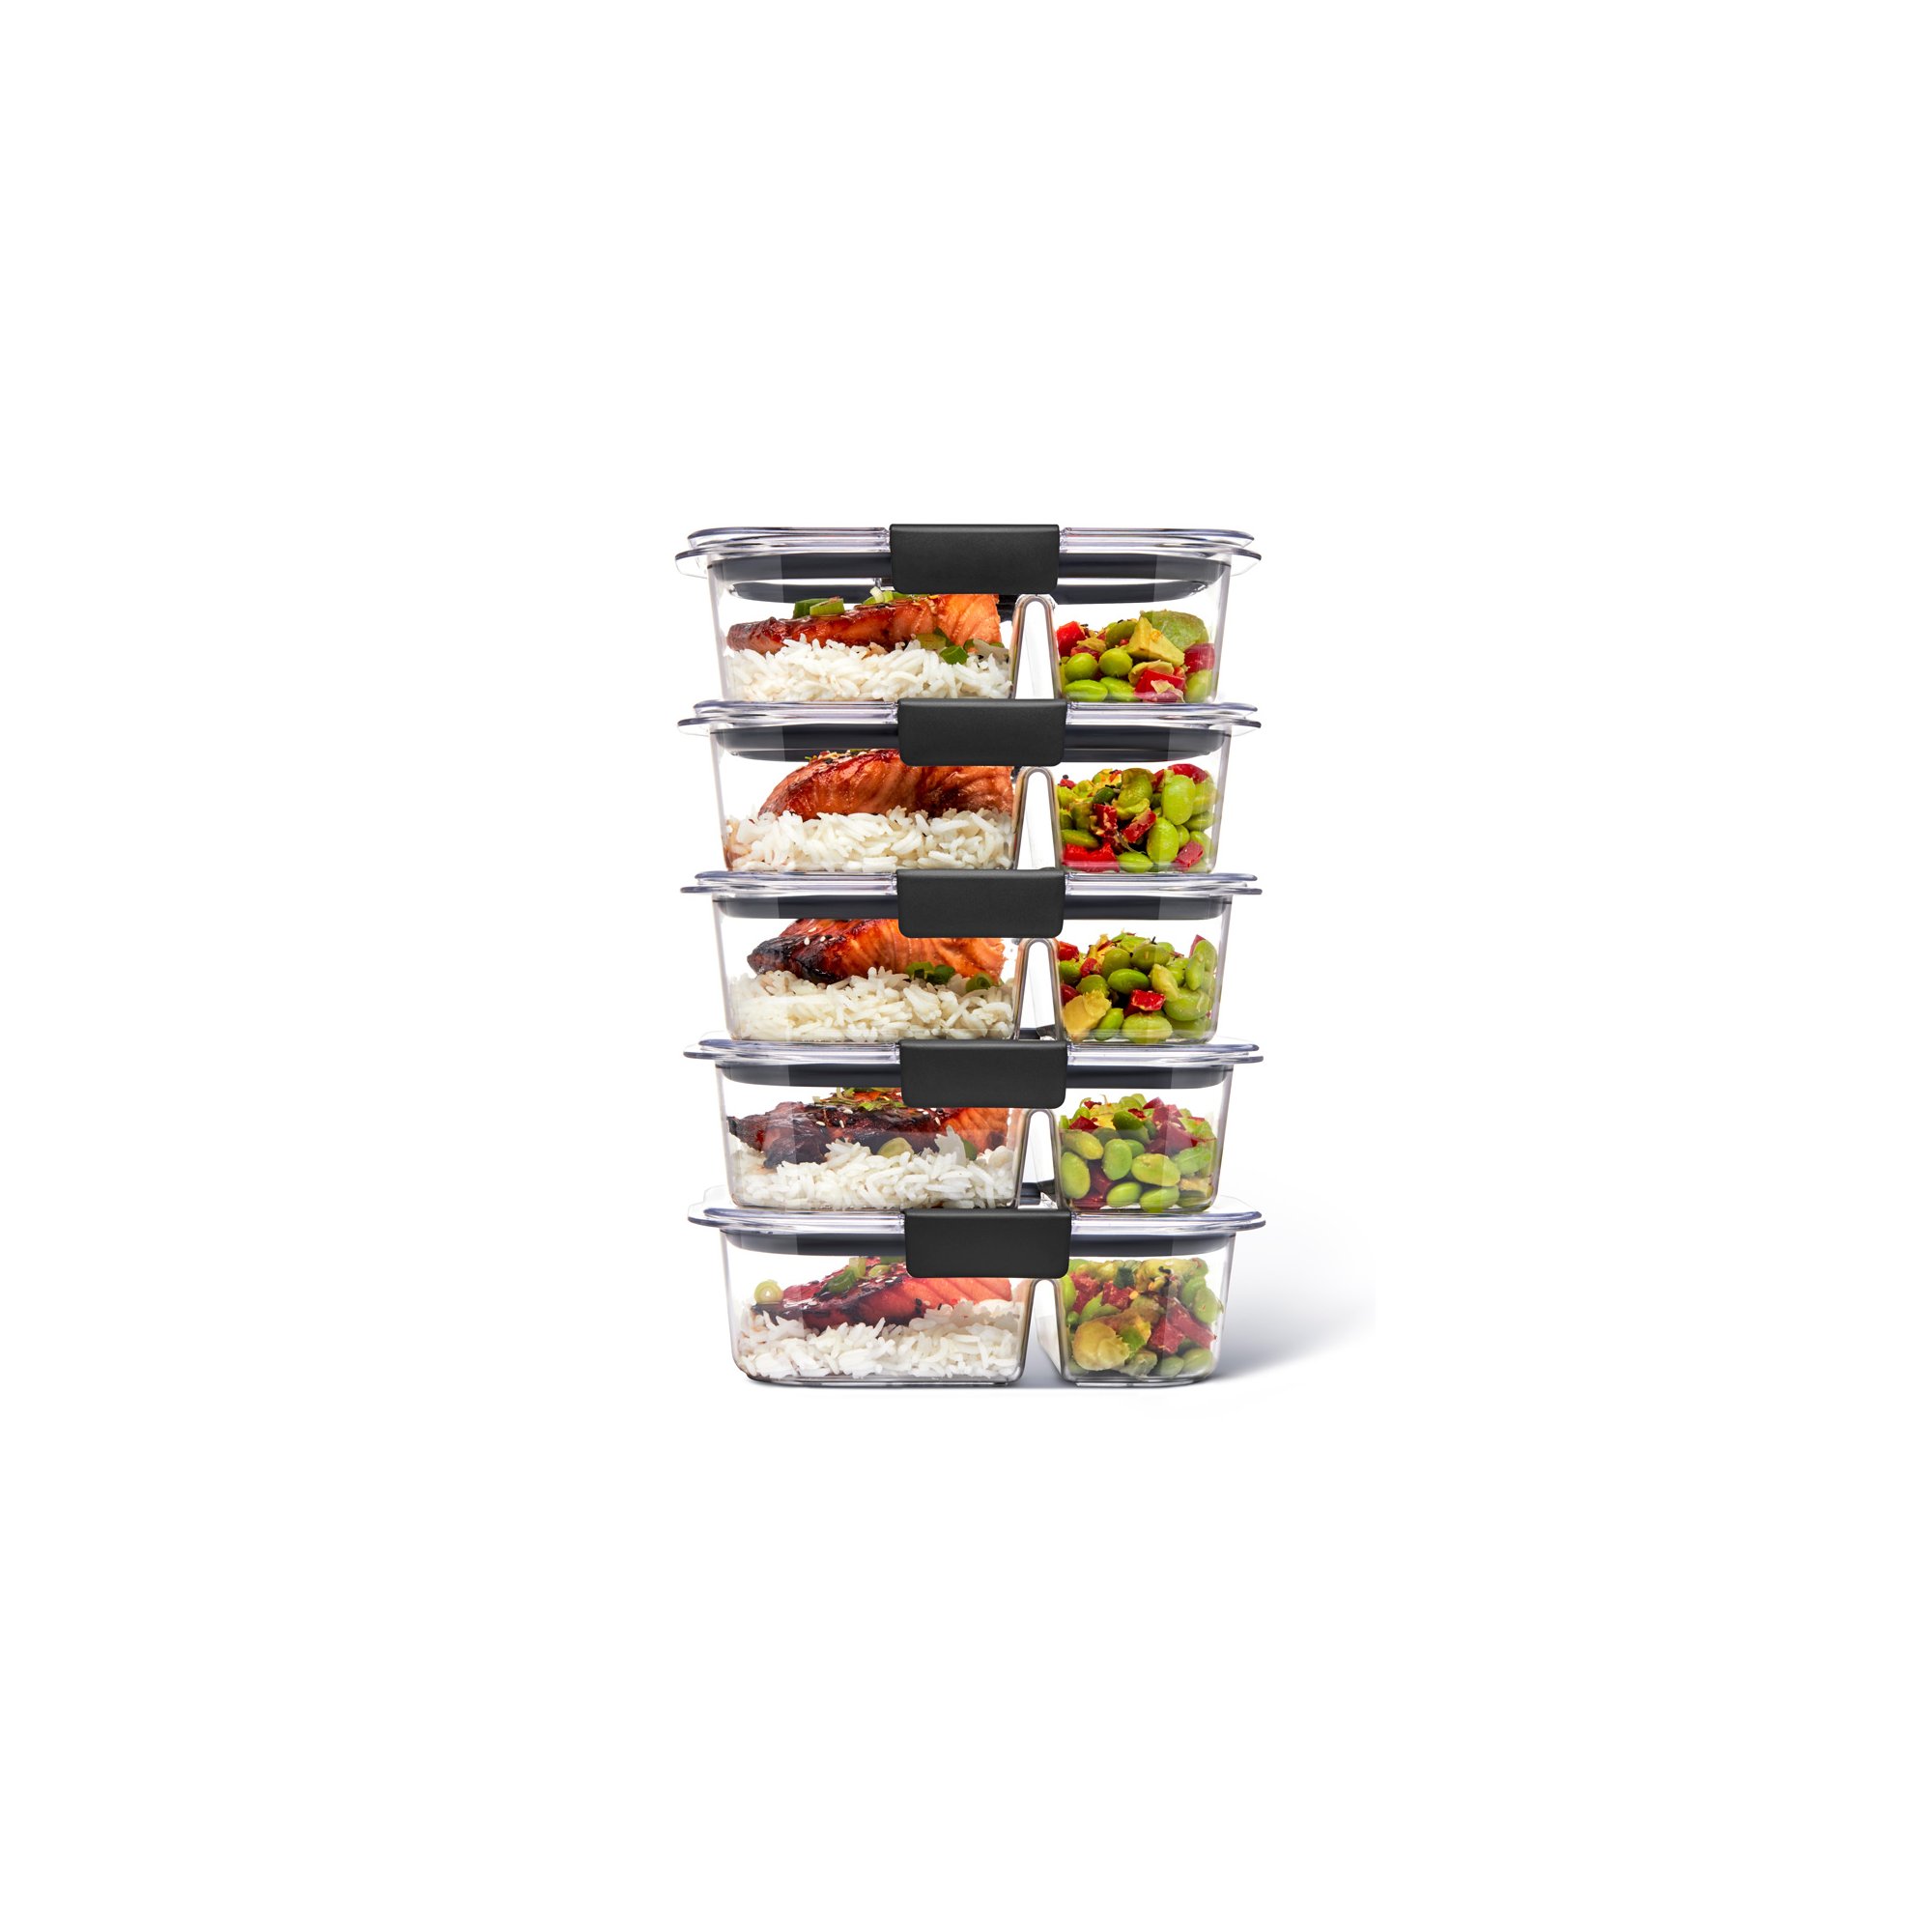 Rubbermaid® Brilliance™ Meal Prep Containers, 2-Compartment Food Storage  Containers, 2.85 Cup, 5-Pack